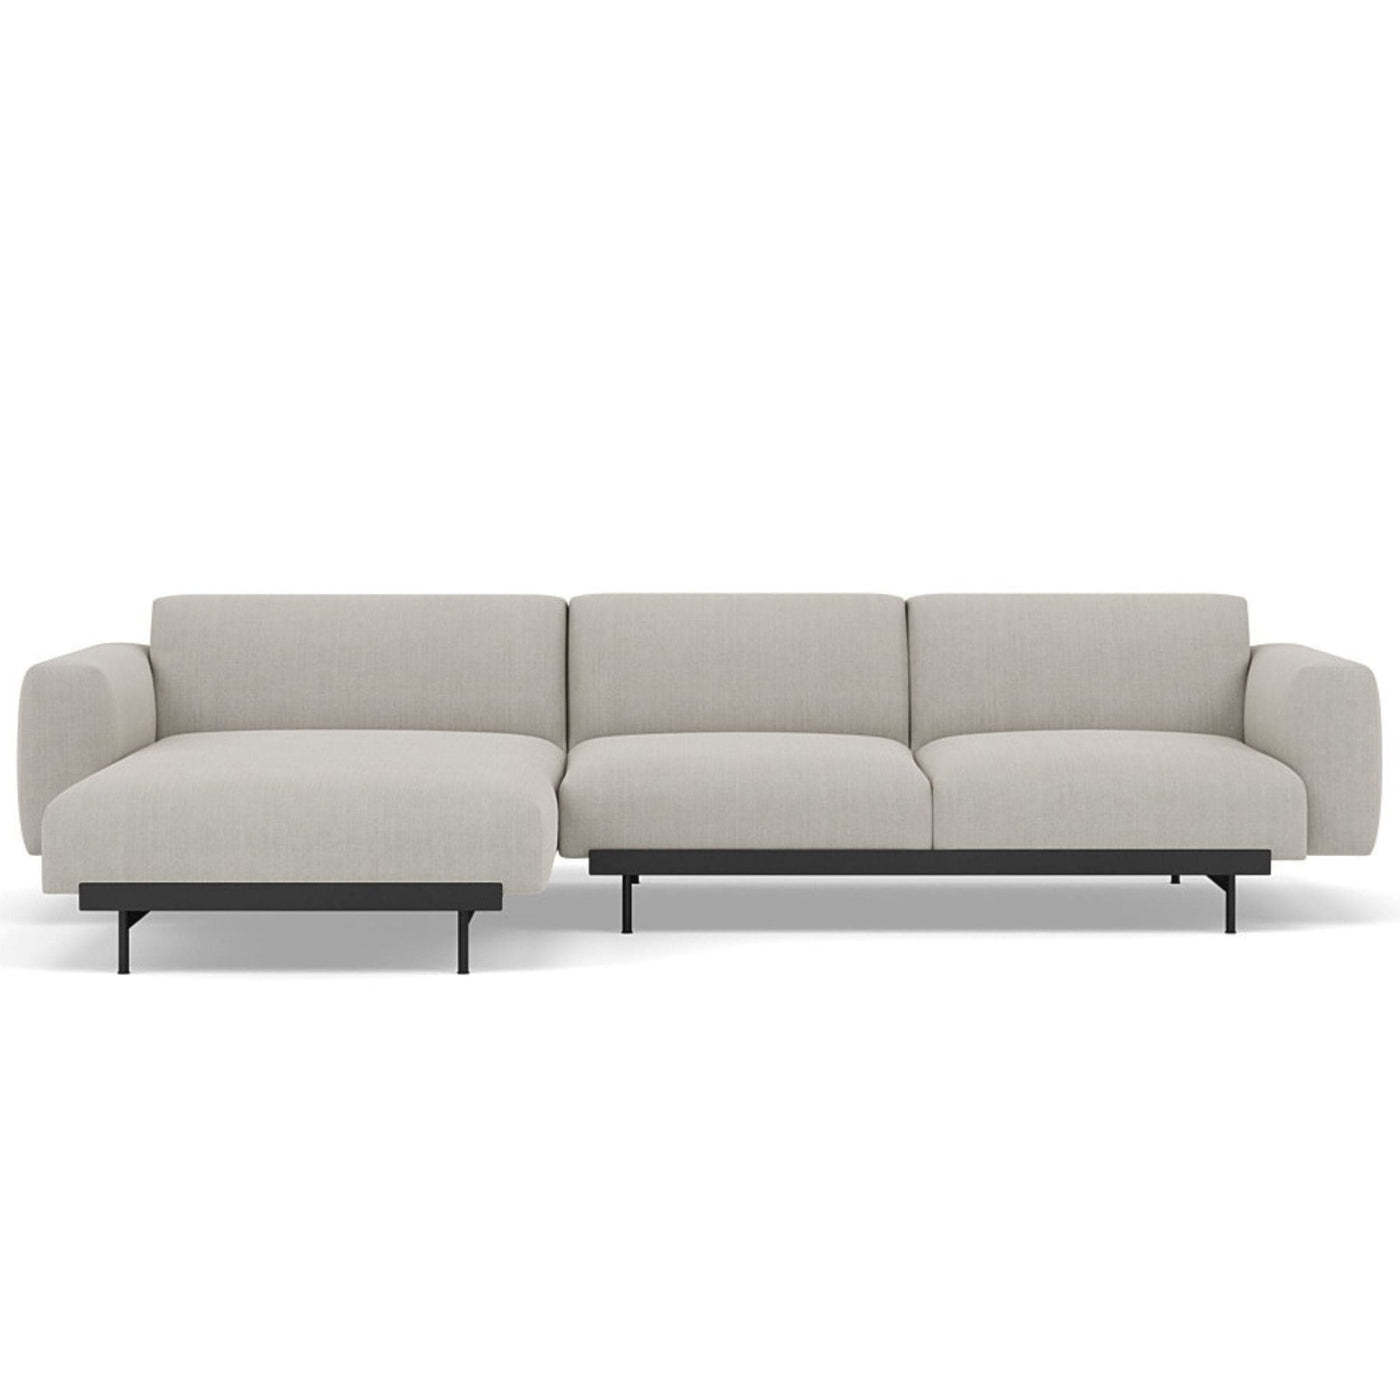 Muuto In Situ Modular 3 Seater Sofa, configuration 7. Made to order from someday designs. #colour_fiord-201